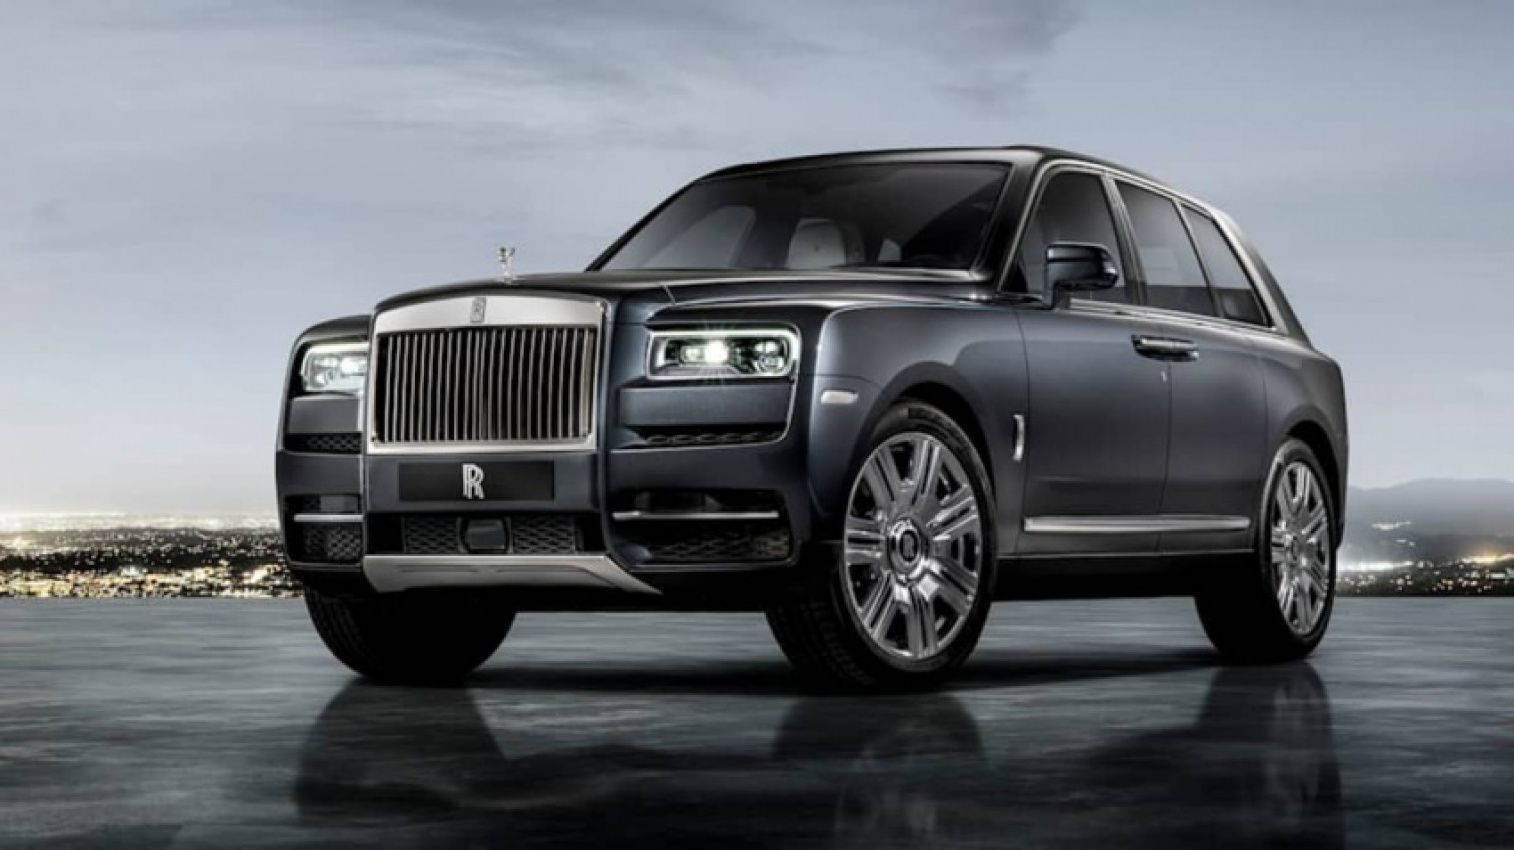 autos, cars, rolls-royce, vfacts january 2022: rolls-royce reports zero cars as sold